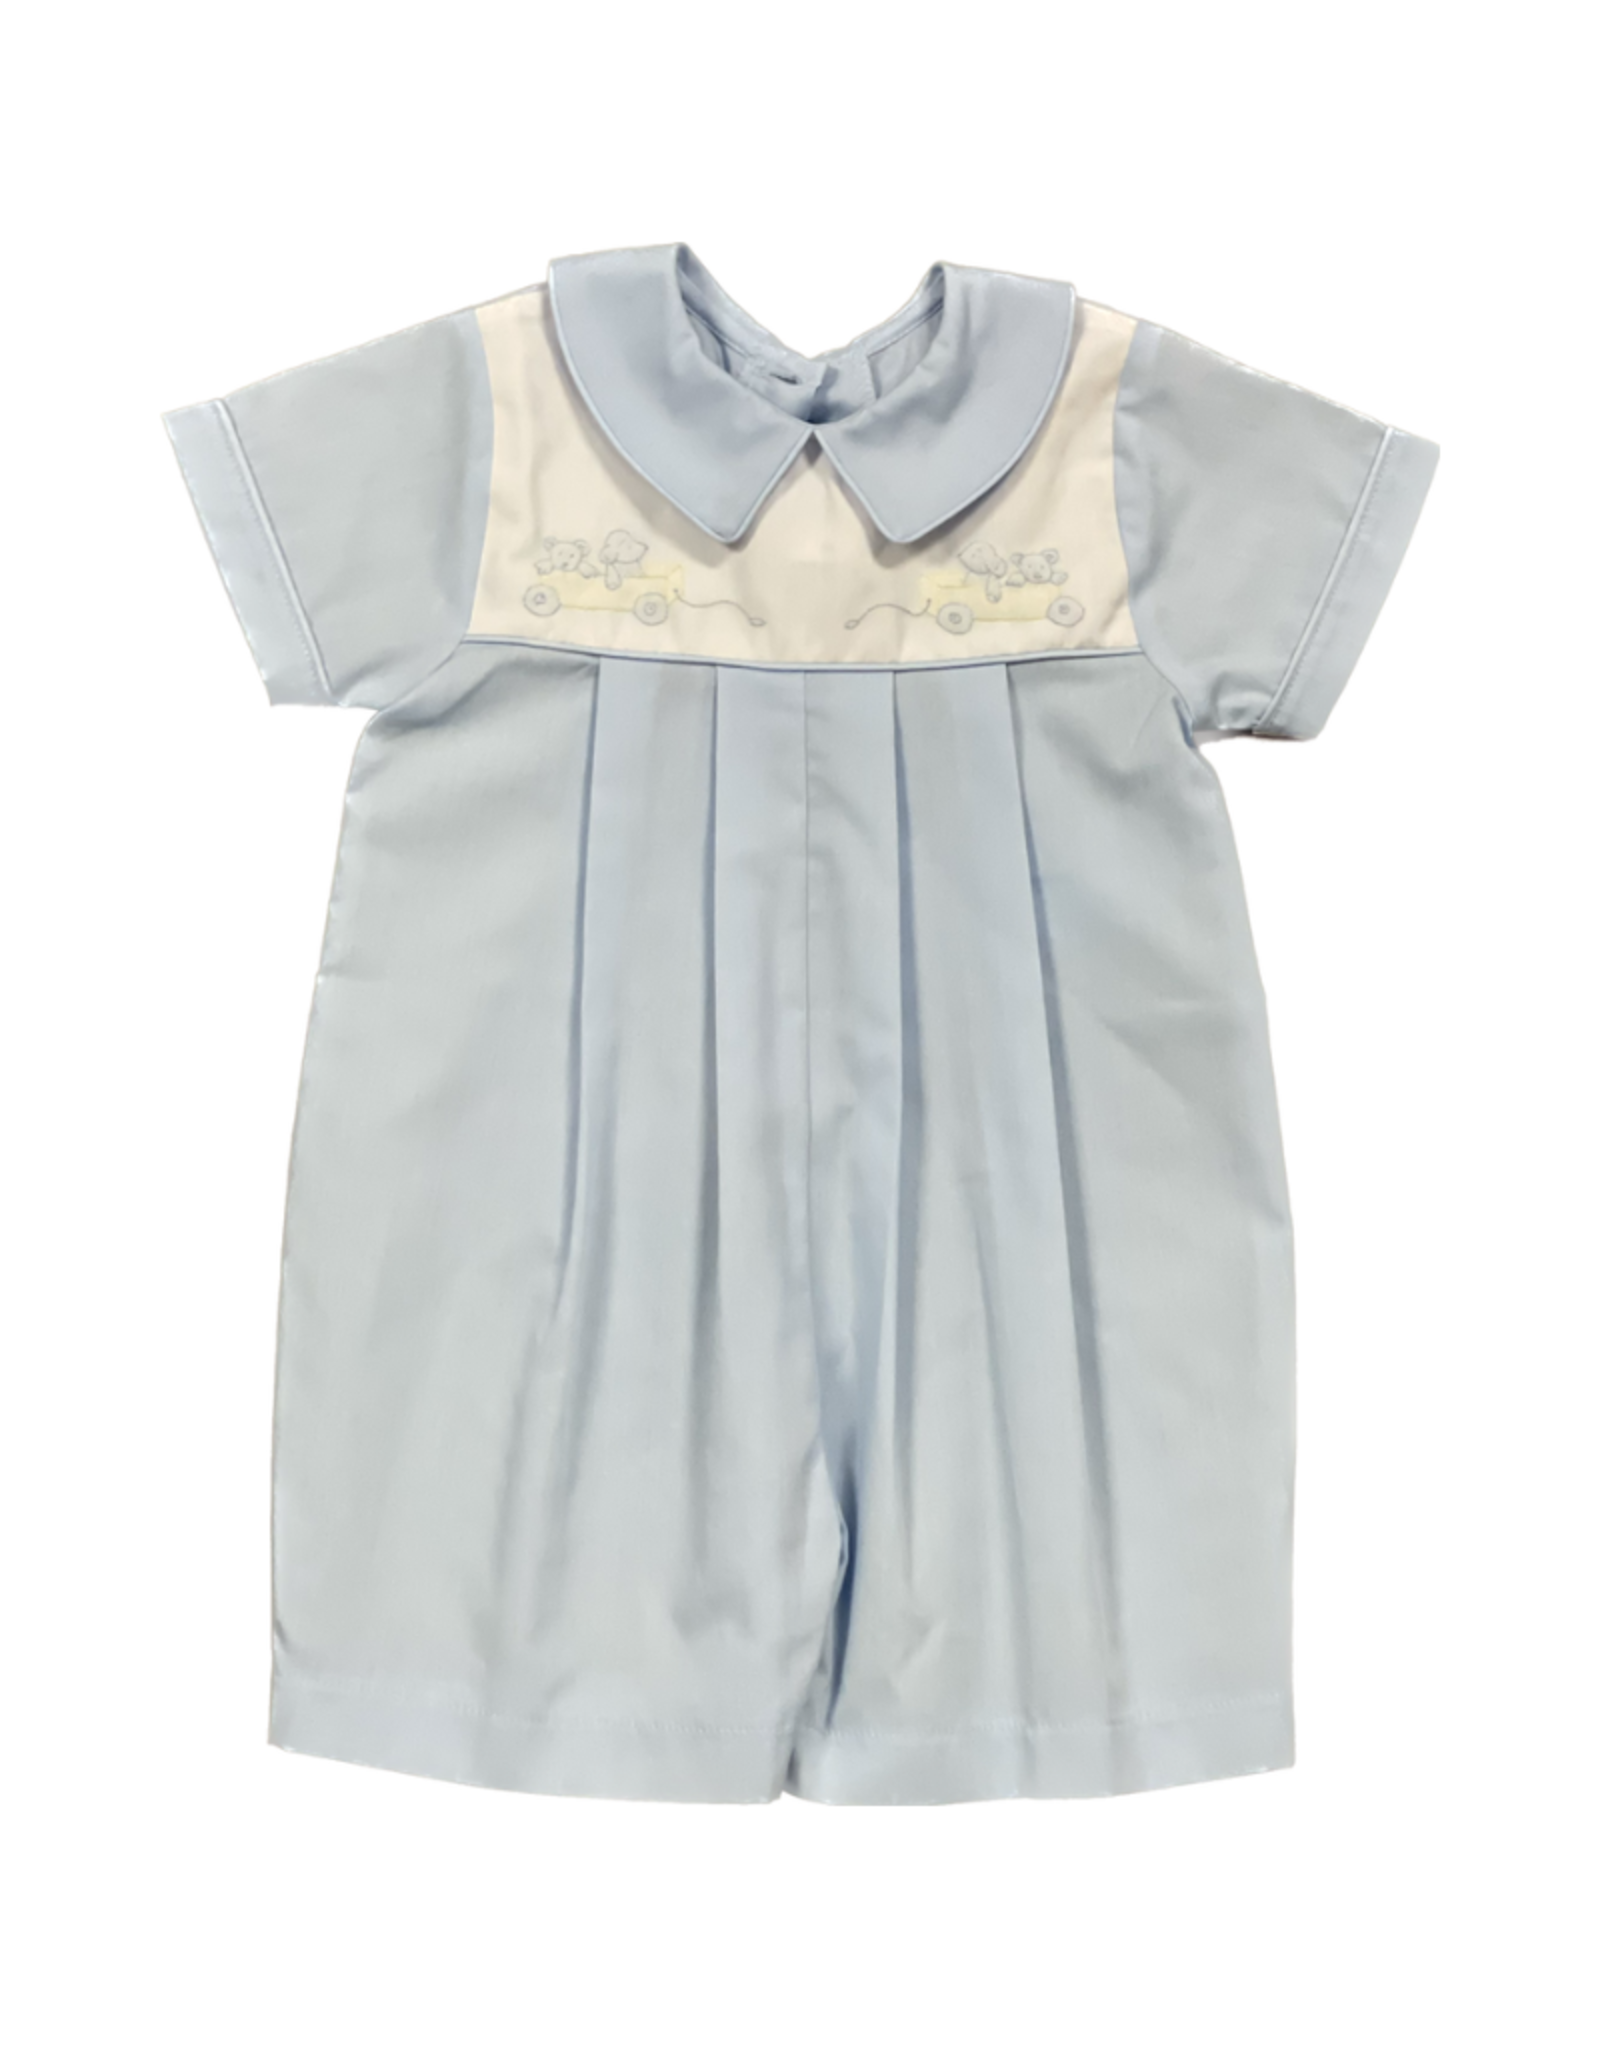 Auraluz Blue Shortall with Toy Wagon Embroidery (567)